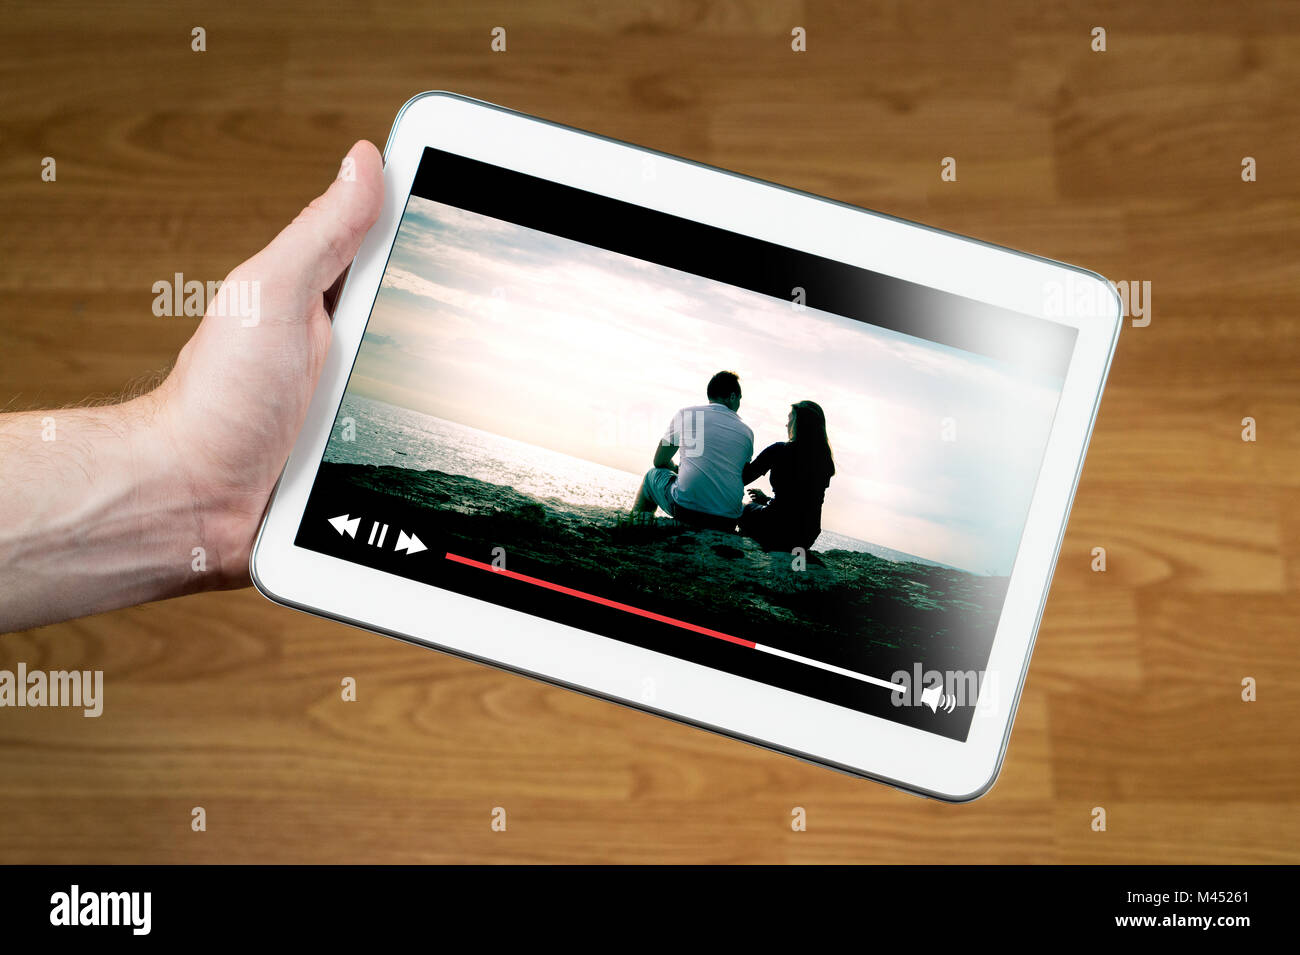 Man watching movie online with mobile device. Hand holding tablet with imaginary video player and film streaming service. Stock Photo